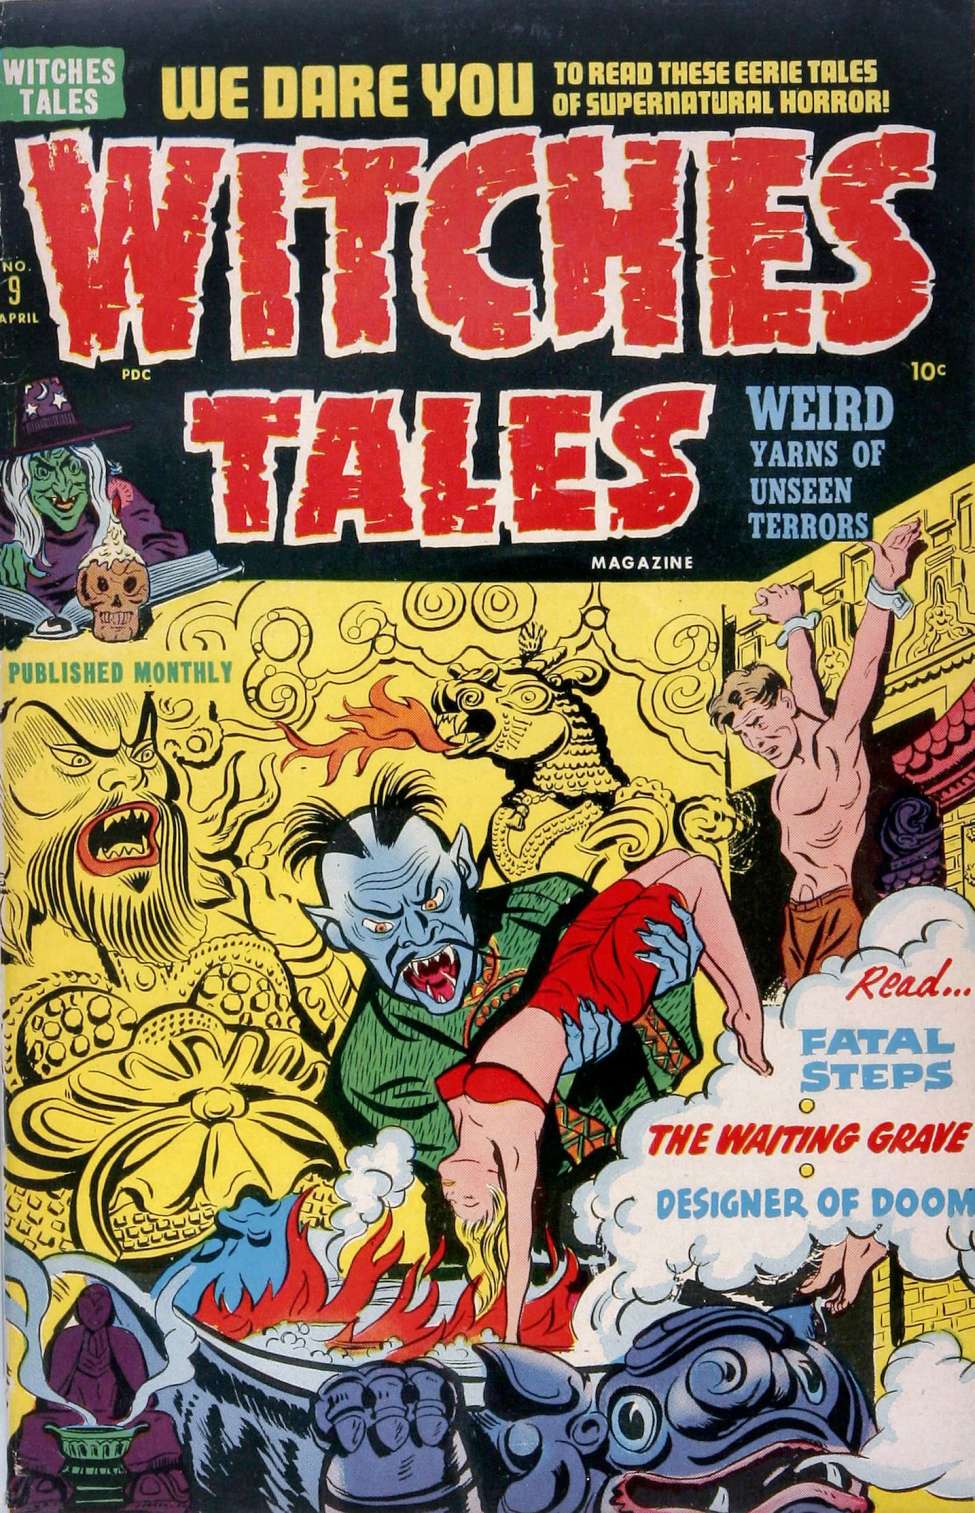 Book Cover For Witches Tales 9